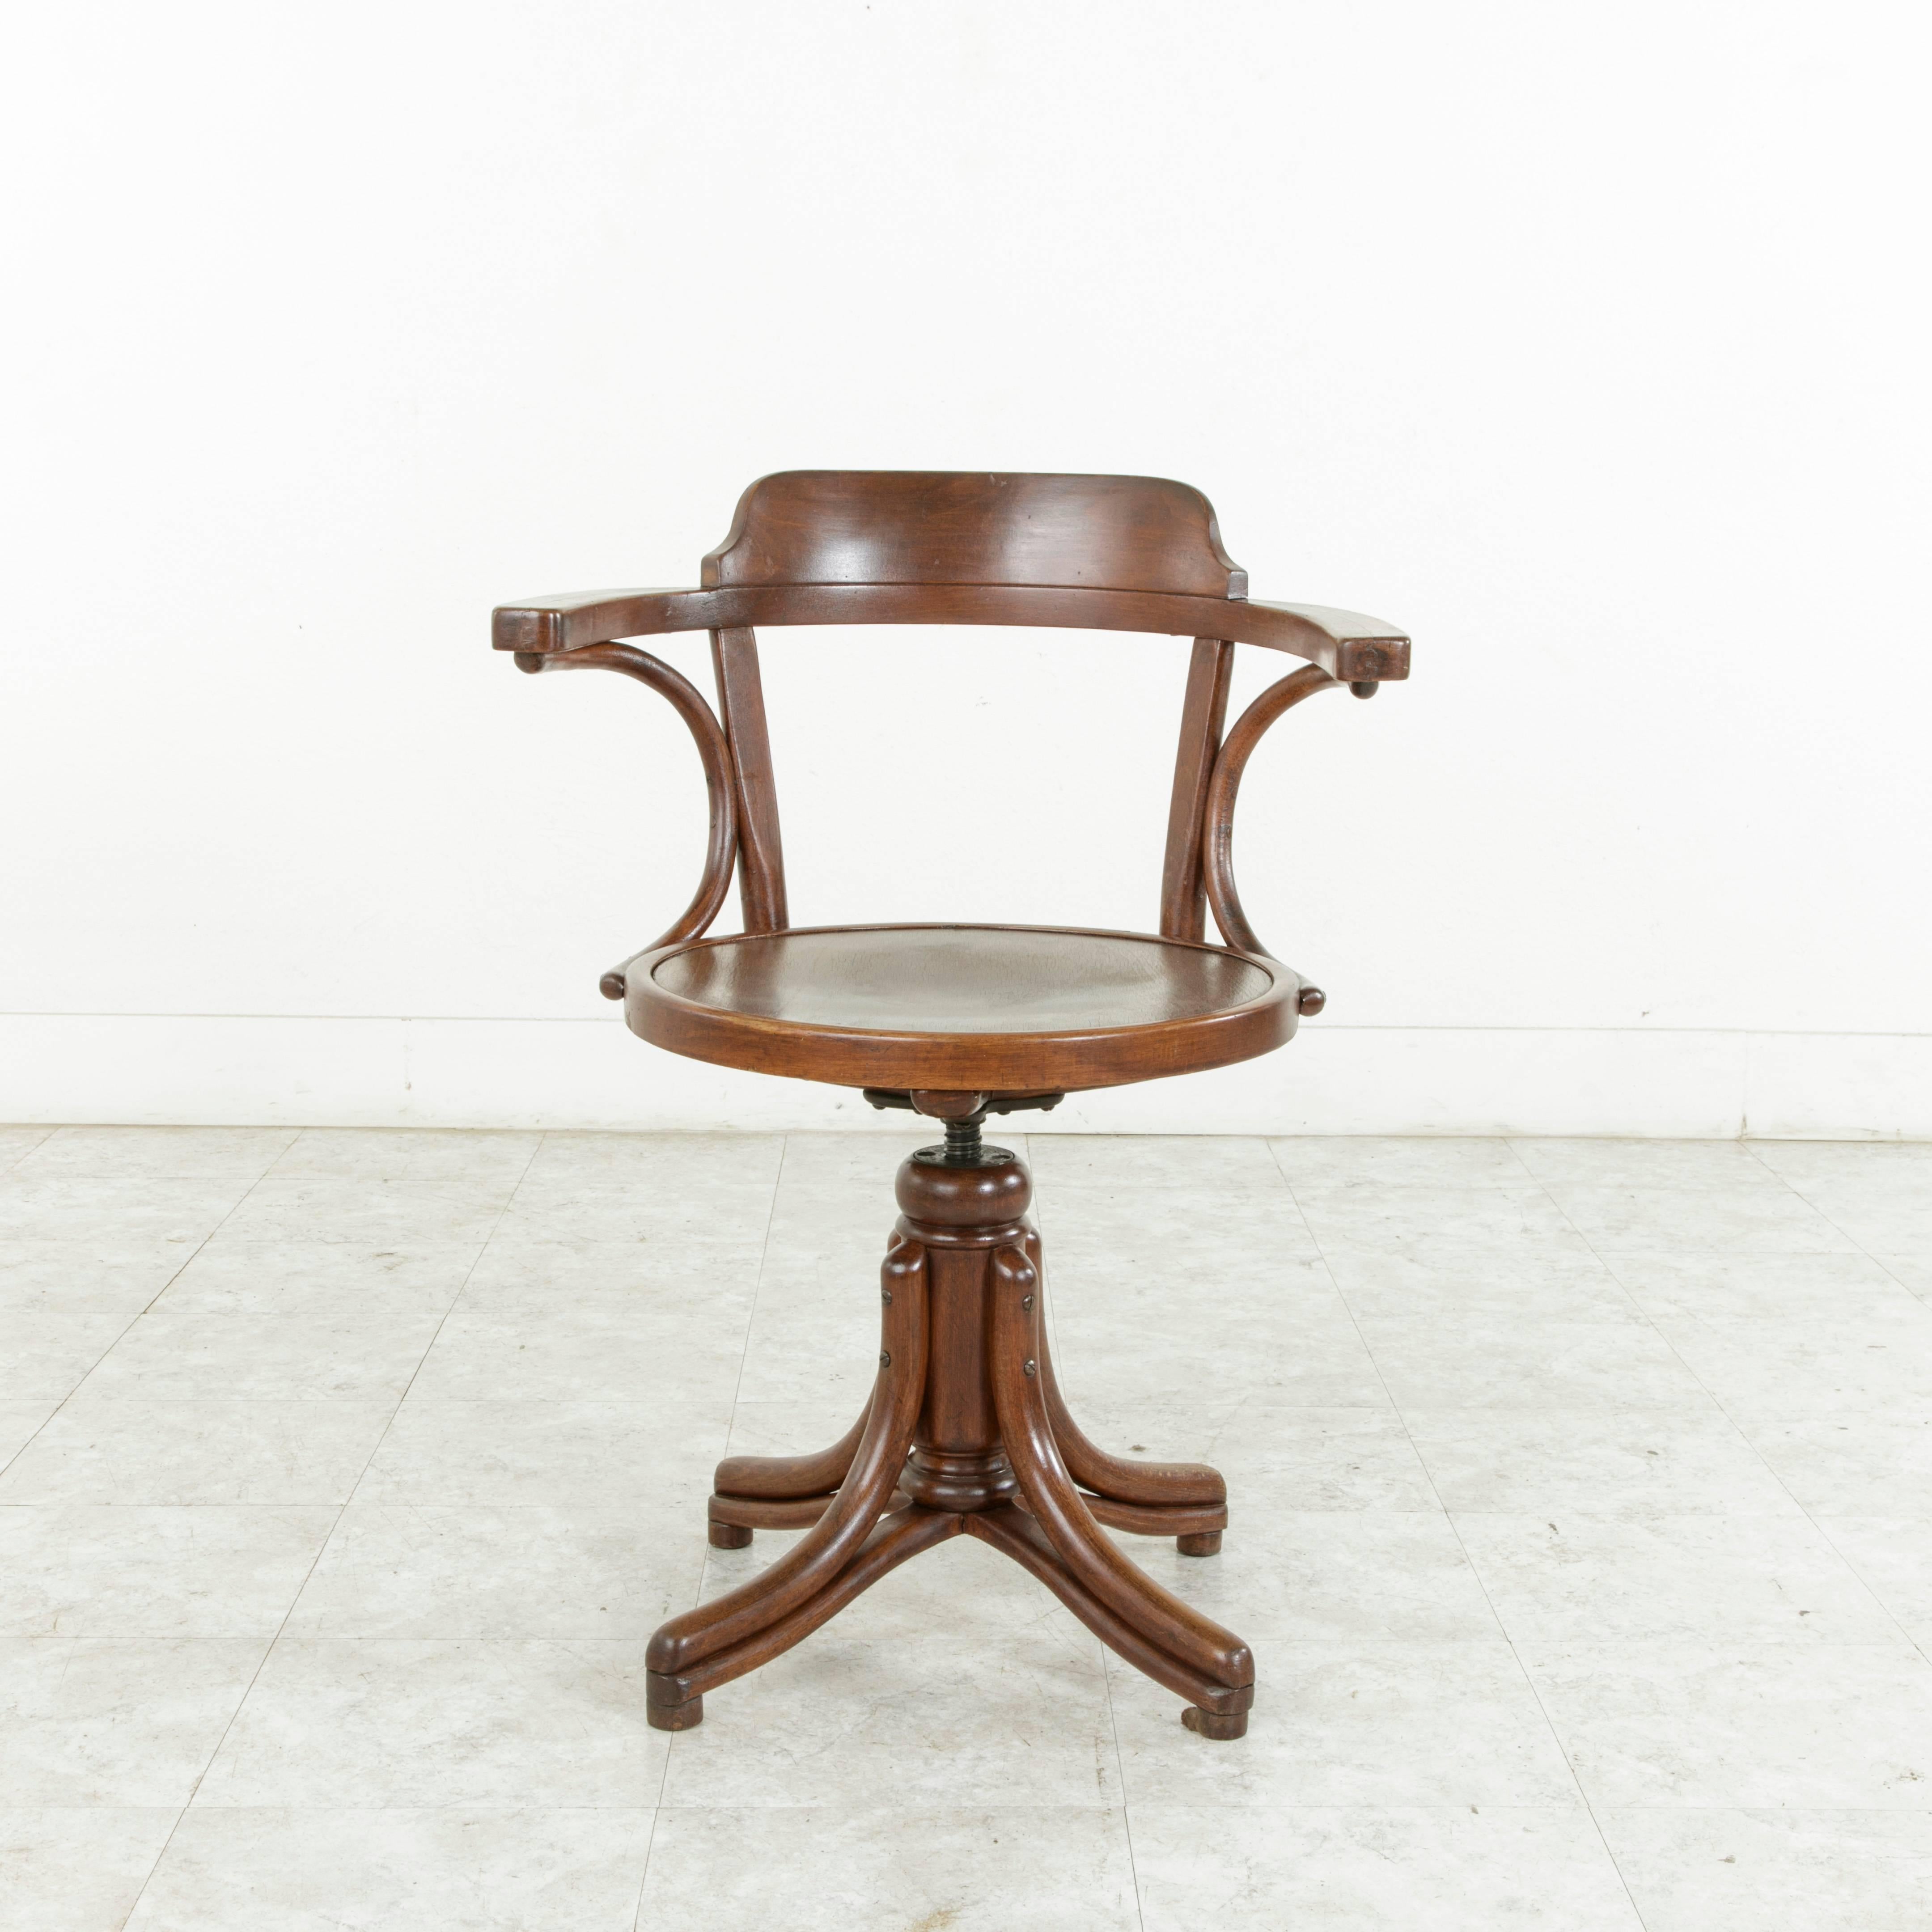 A rare find in Thonet's repertoire of chairs, this bentwood swiveling desk chair or armchair has an adjustable 18.5 to 27 inch seat height. It still bears its original Thonet sticker. The sticker includes in French, Fabricated in Czechoslovakia,